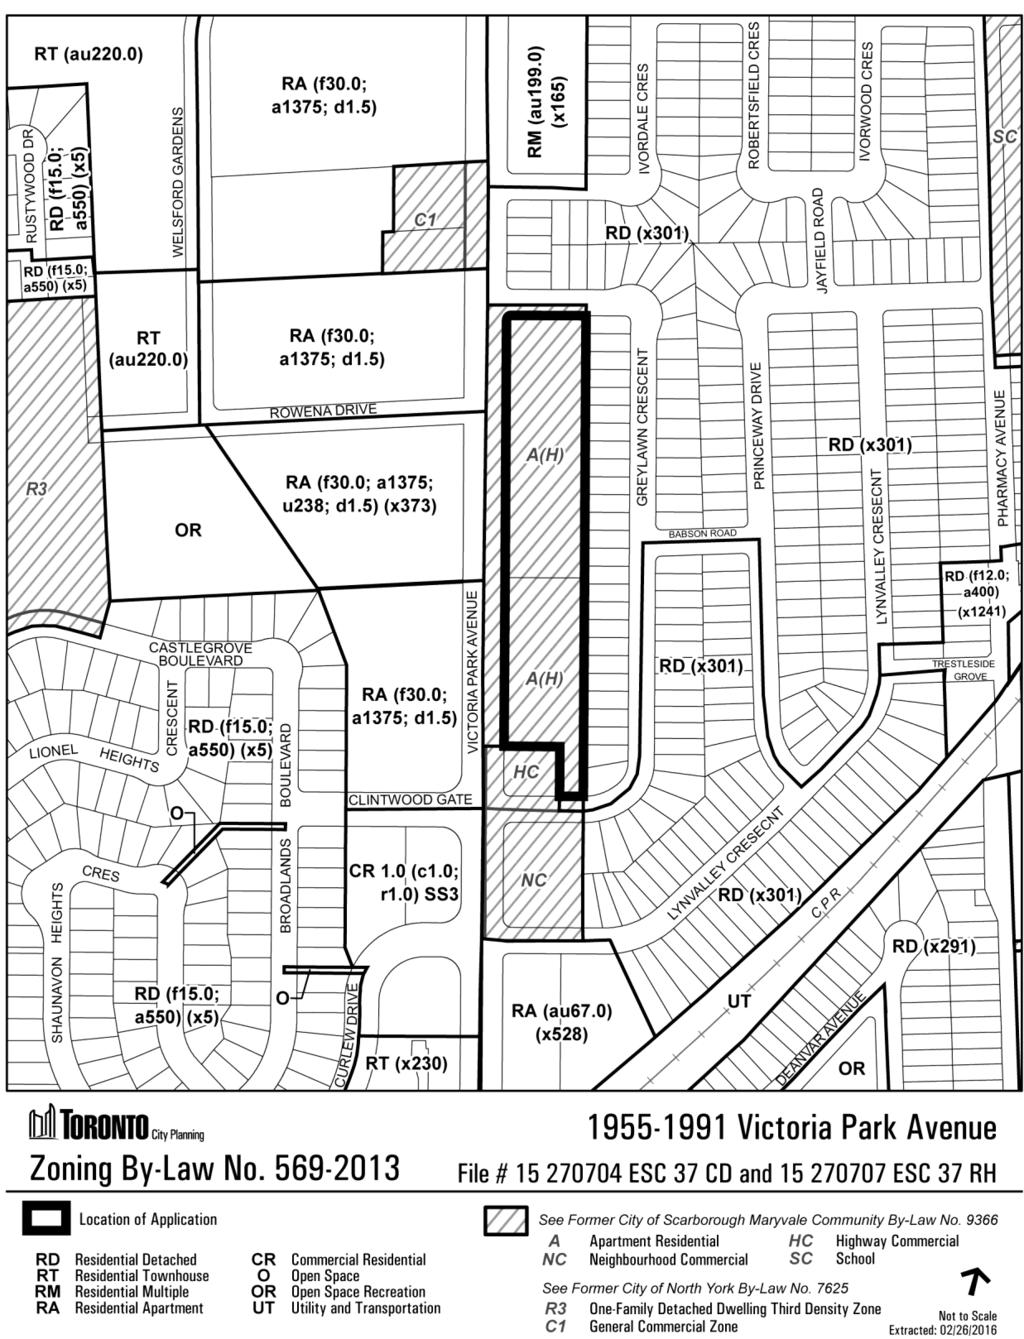 Attachment 2: Zoning Staff report for action